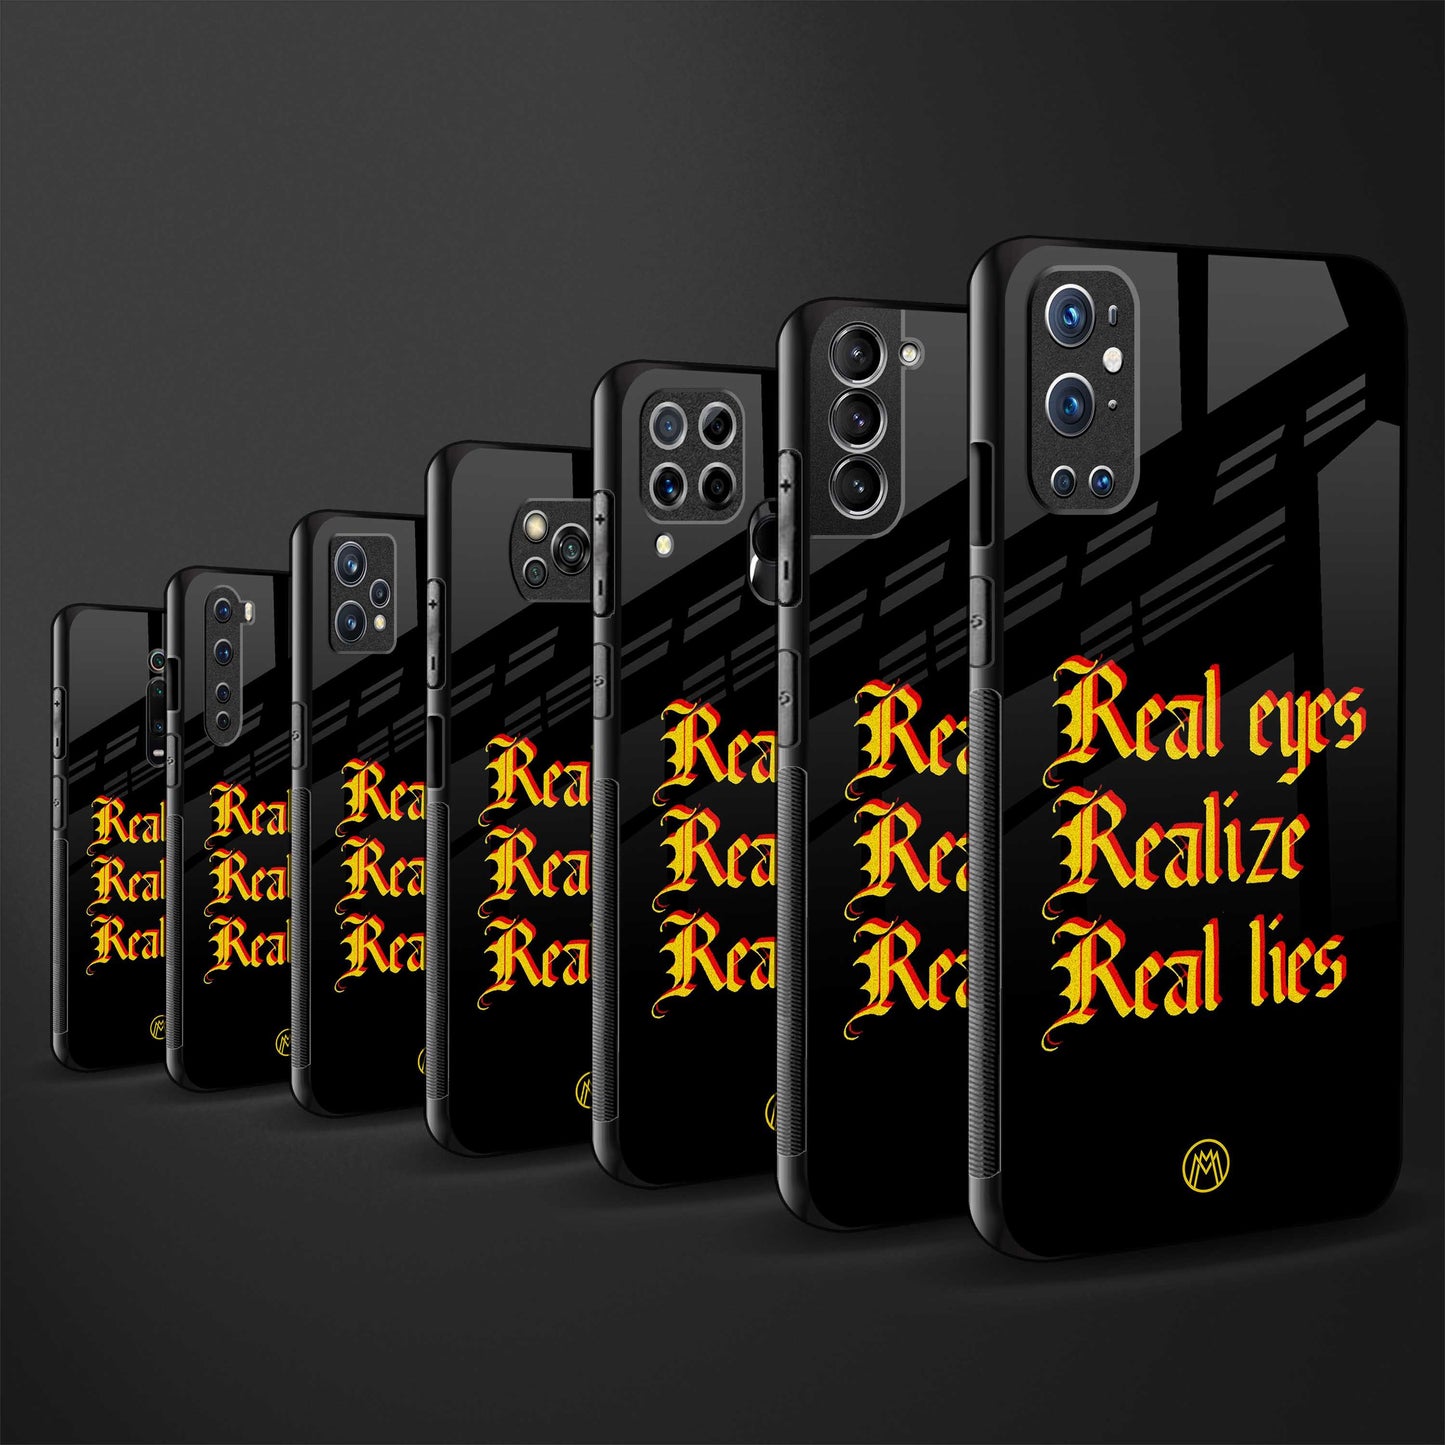 real eyes realize real lies quote glass case for iphone 8 plus image-3